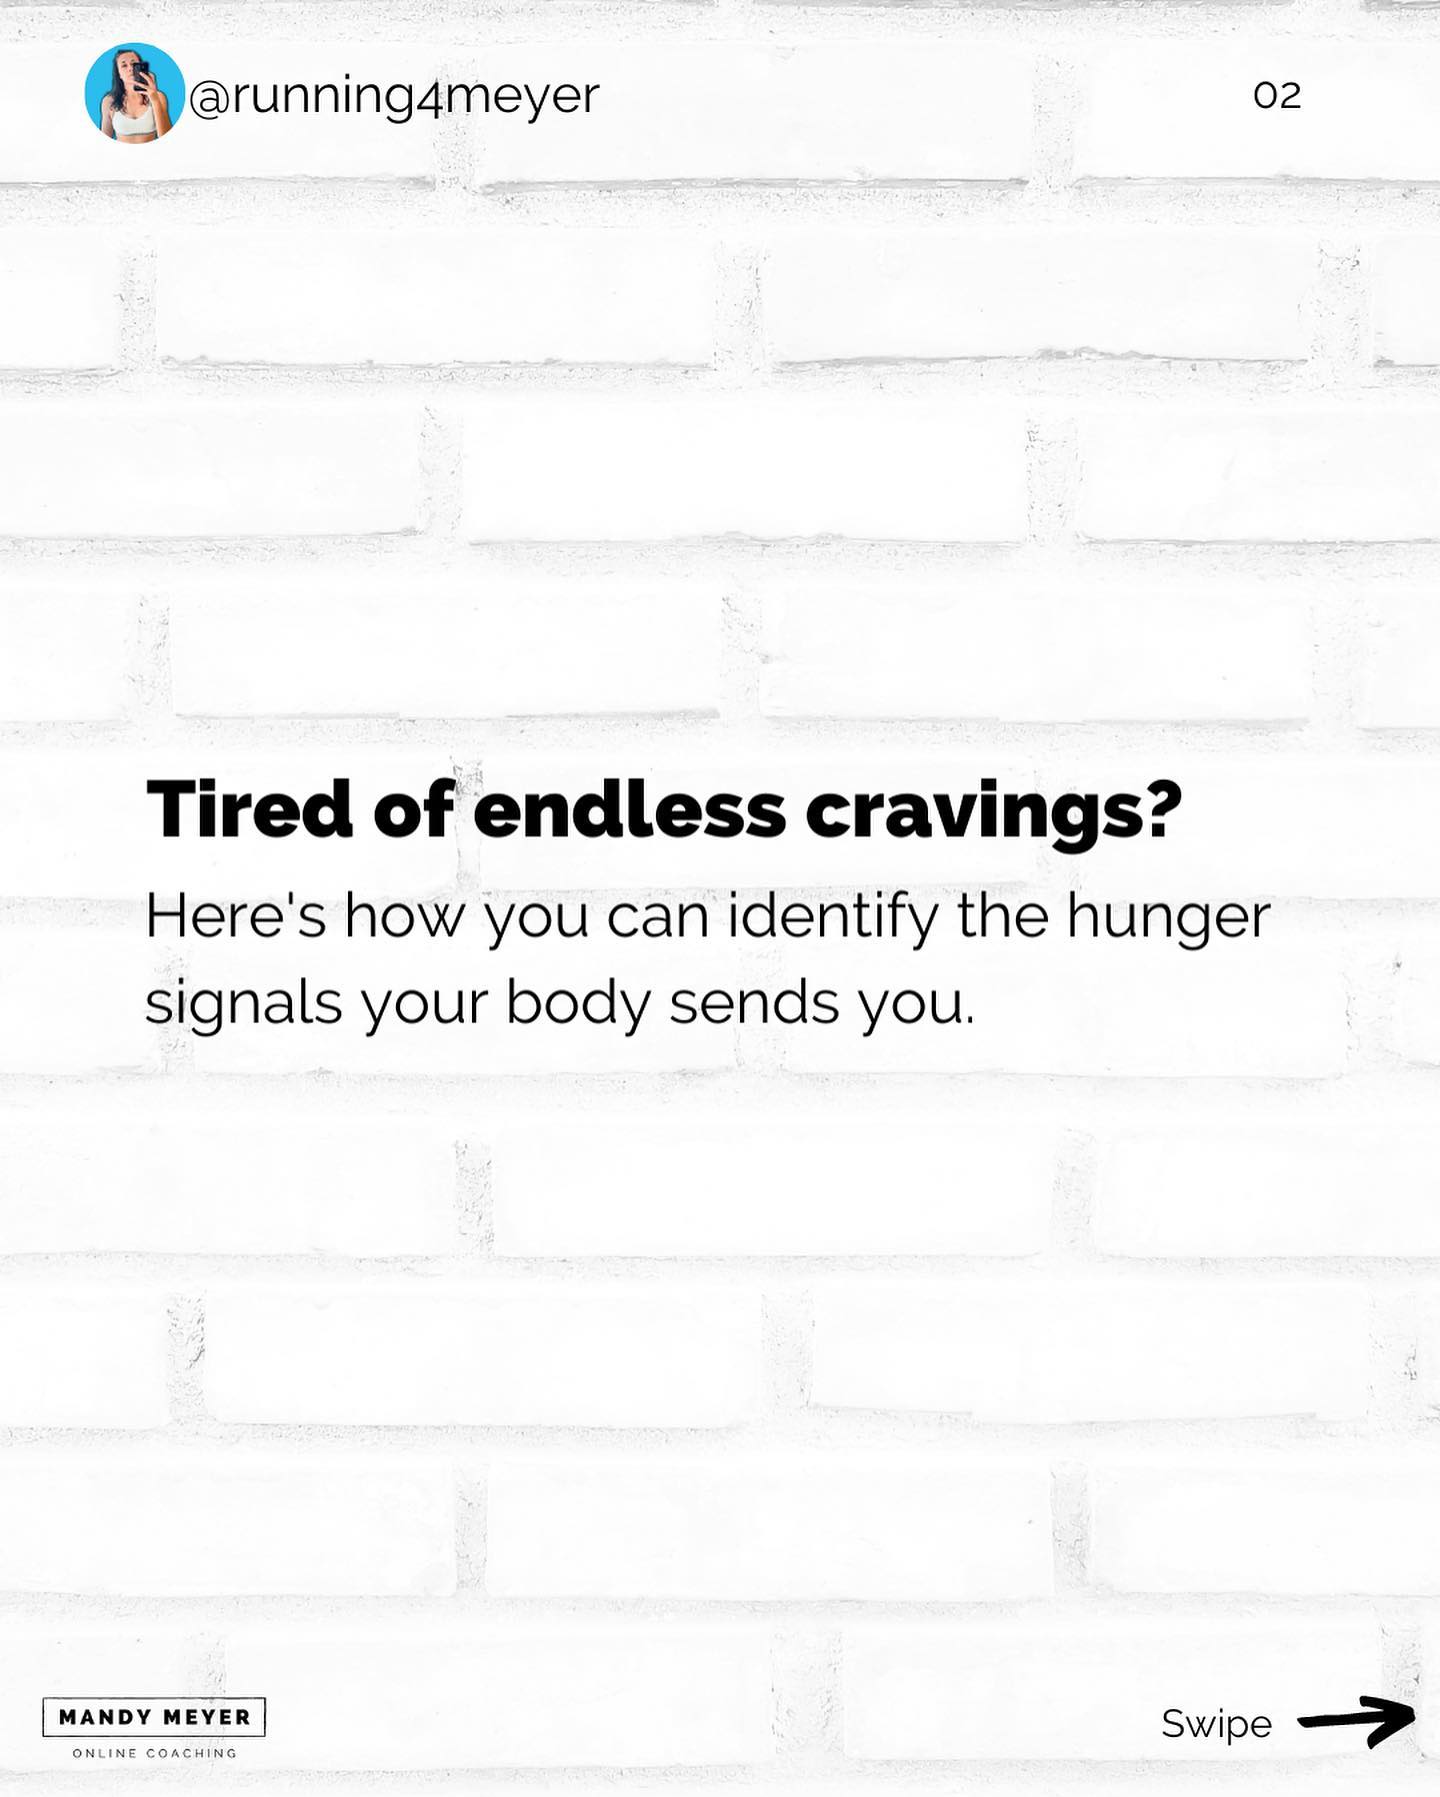 Struggling with Hunger cues & Cravings?Slide 4 and slide 8 contain some basic ...